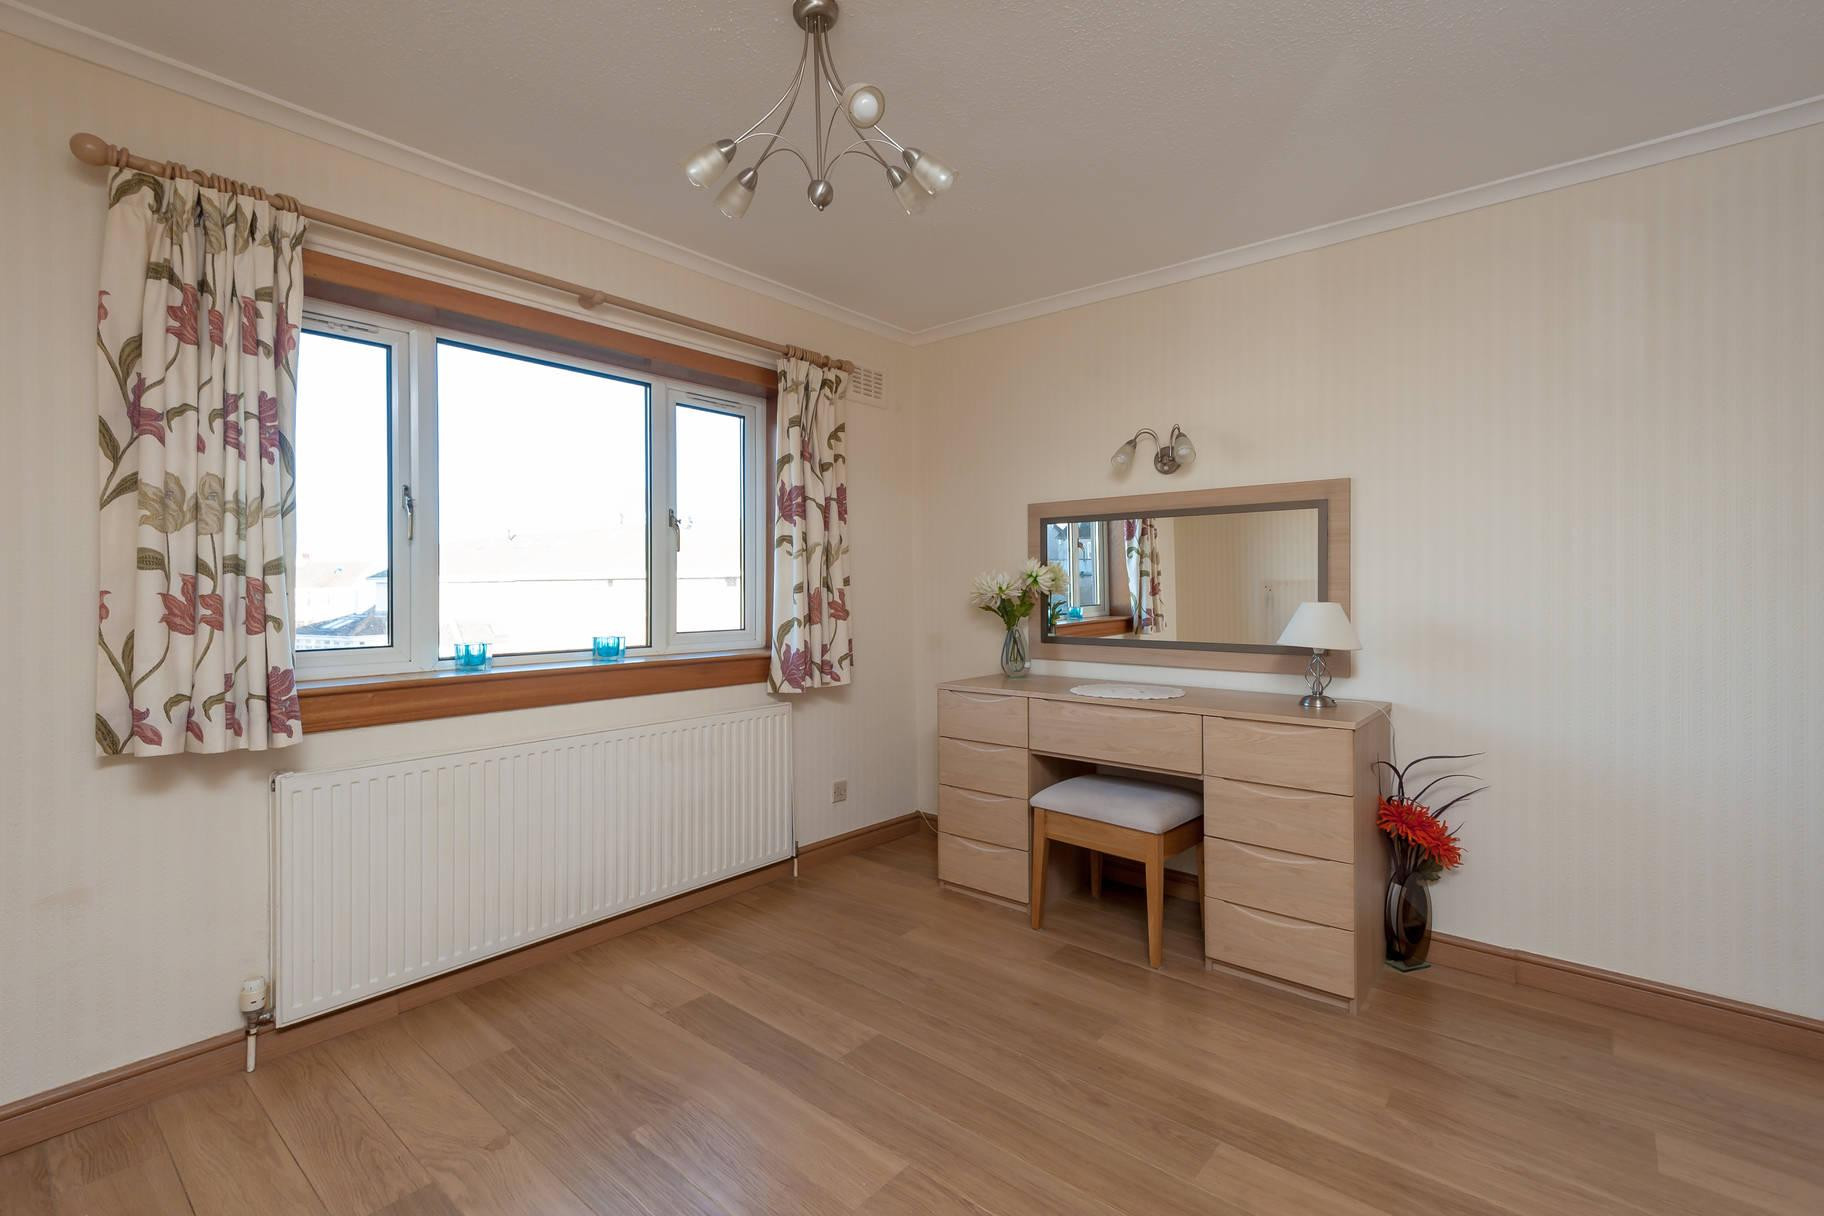 direct hardwood flooring charlotte nc of property for sale edinburgh scotland murray beith murray solicitors intended for 50 silverknowes court edinburgh eh4 5nw